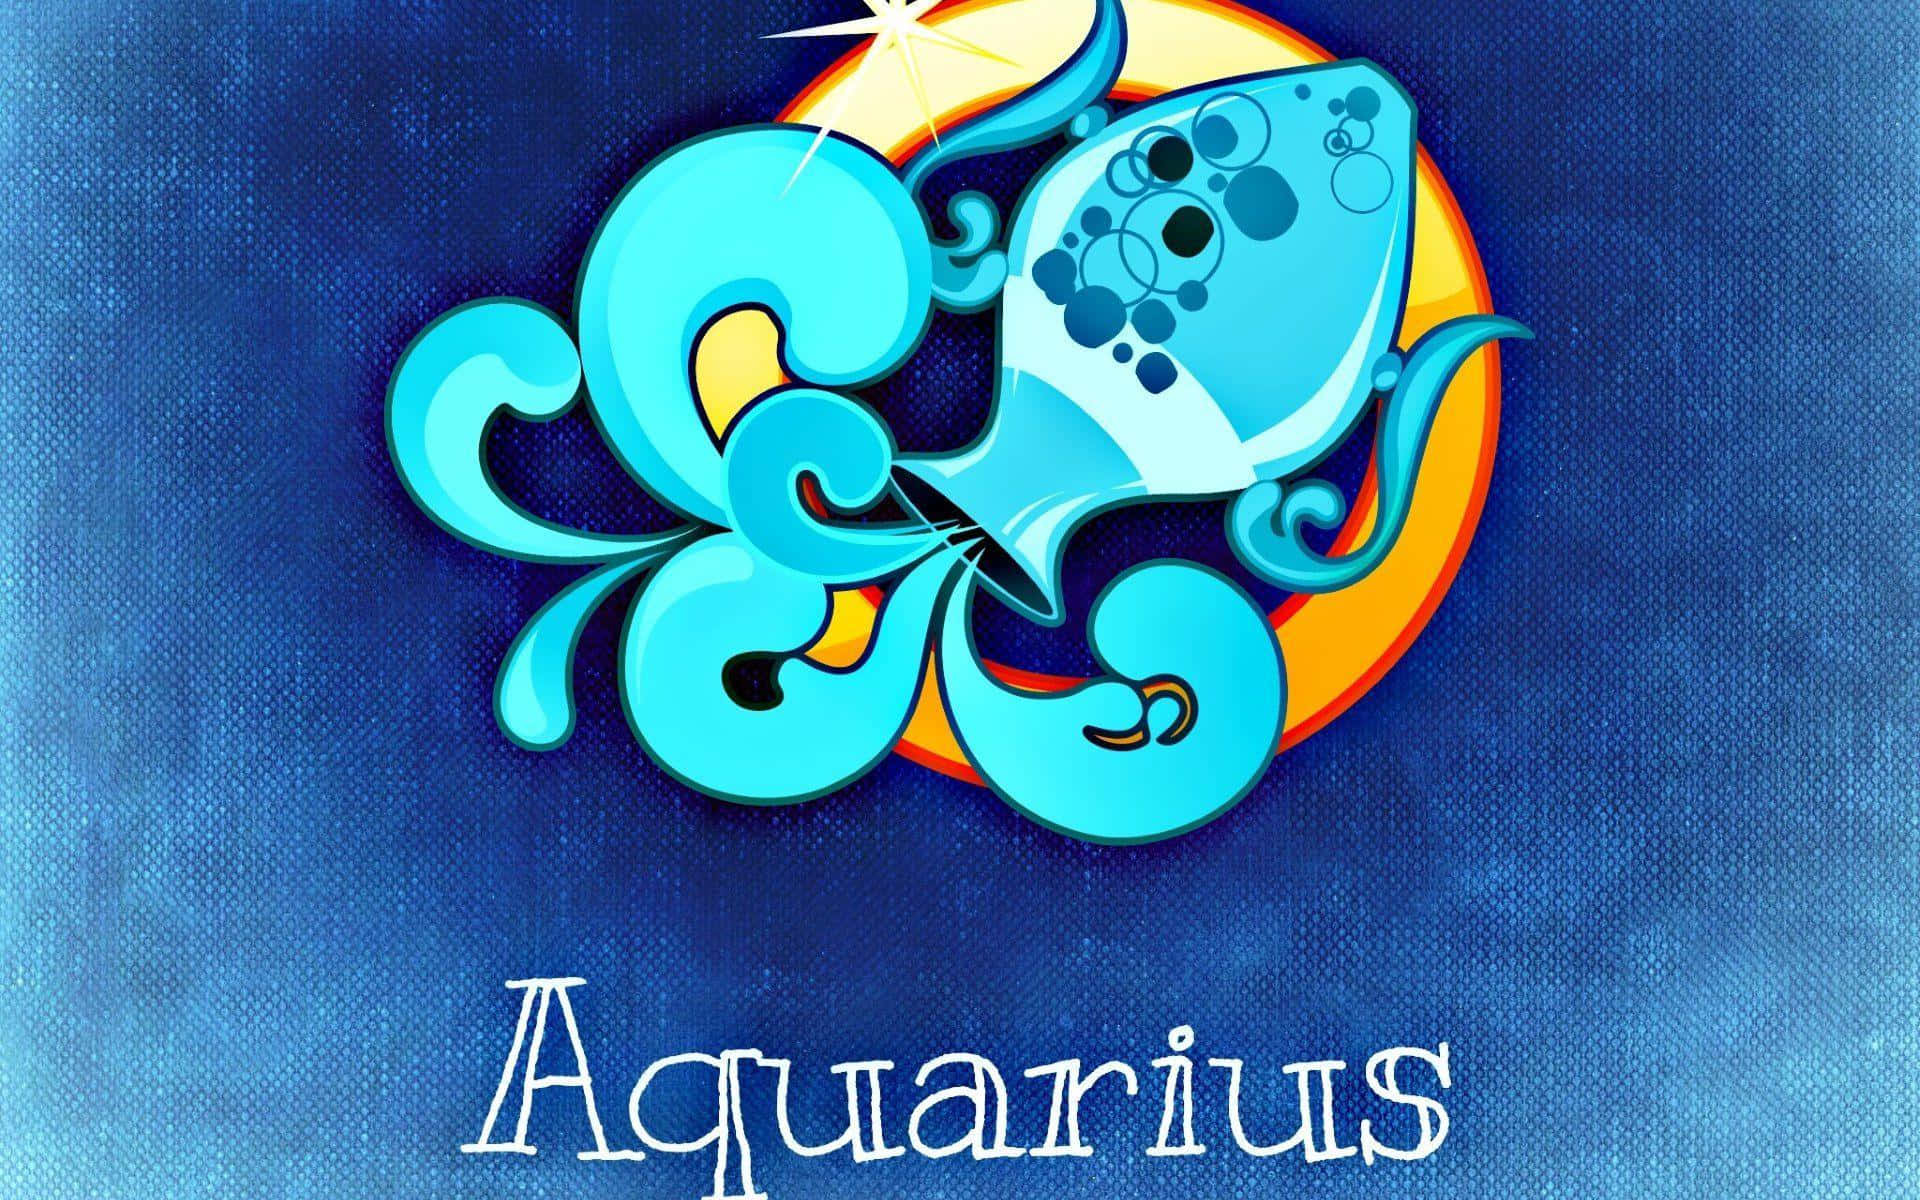 Aquarius show your strength and uniqueness to the world